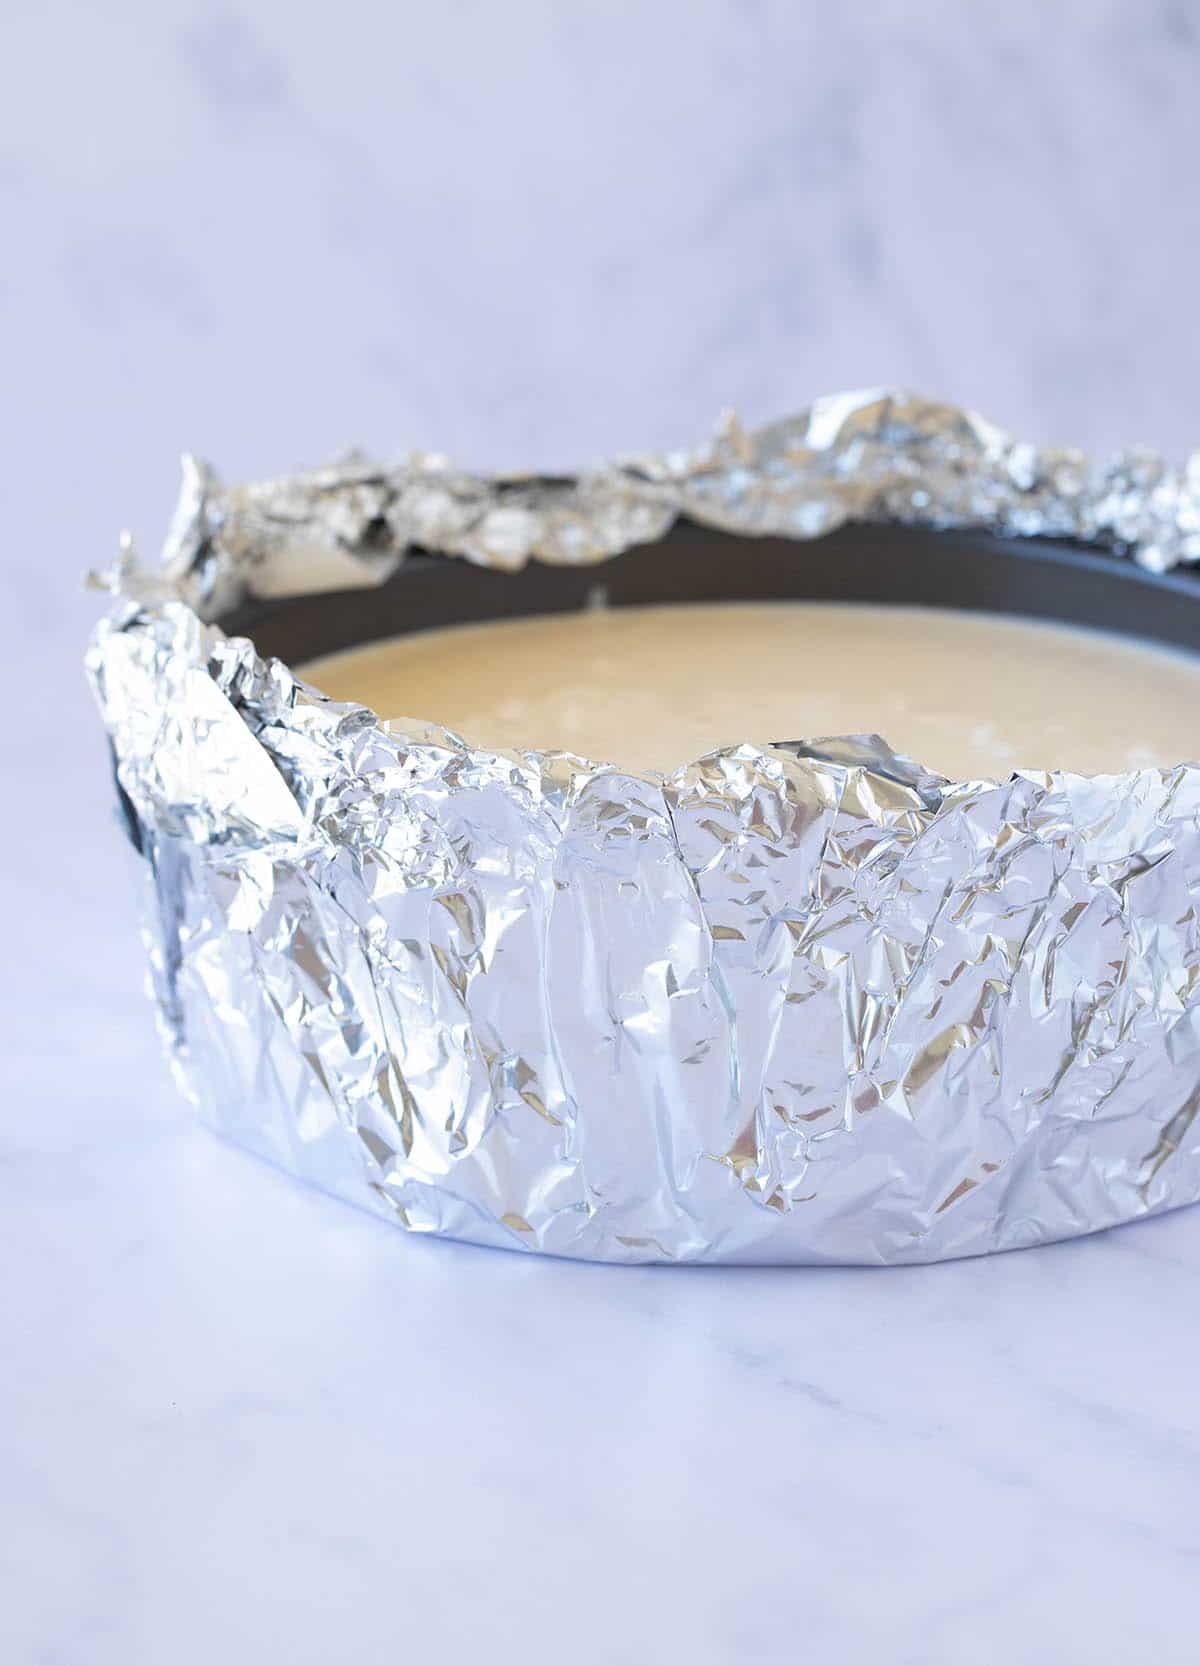 Showing how to make a water bath: A cheesecake wrapped in aluminium foil 